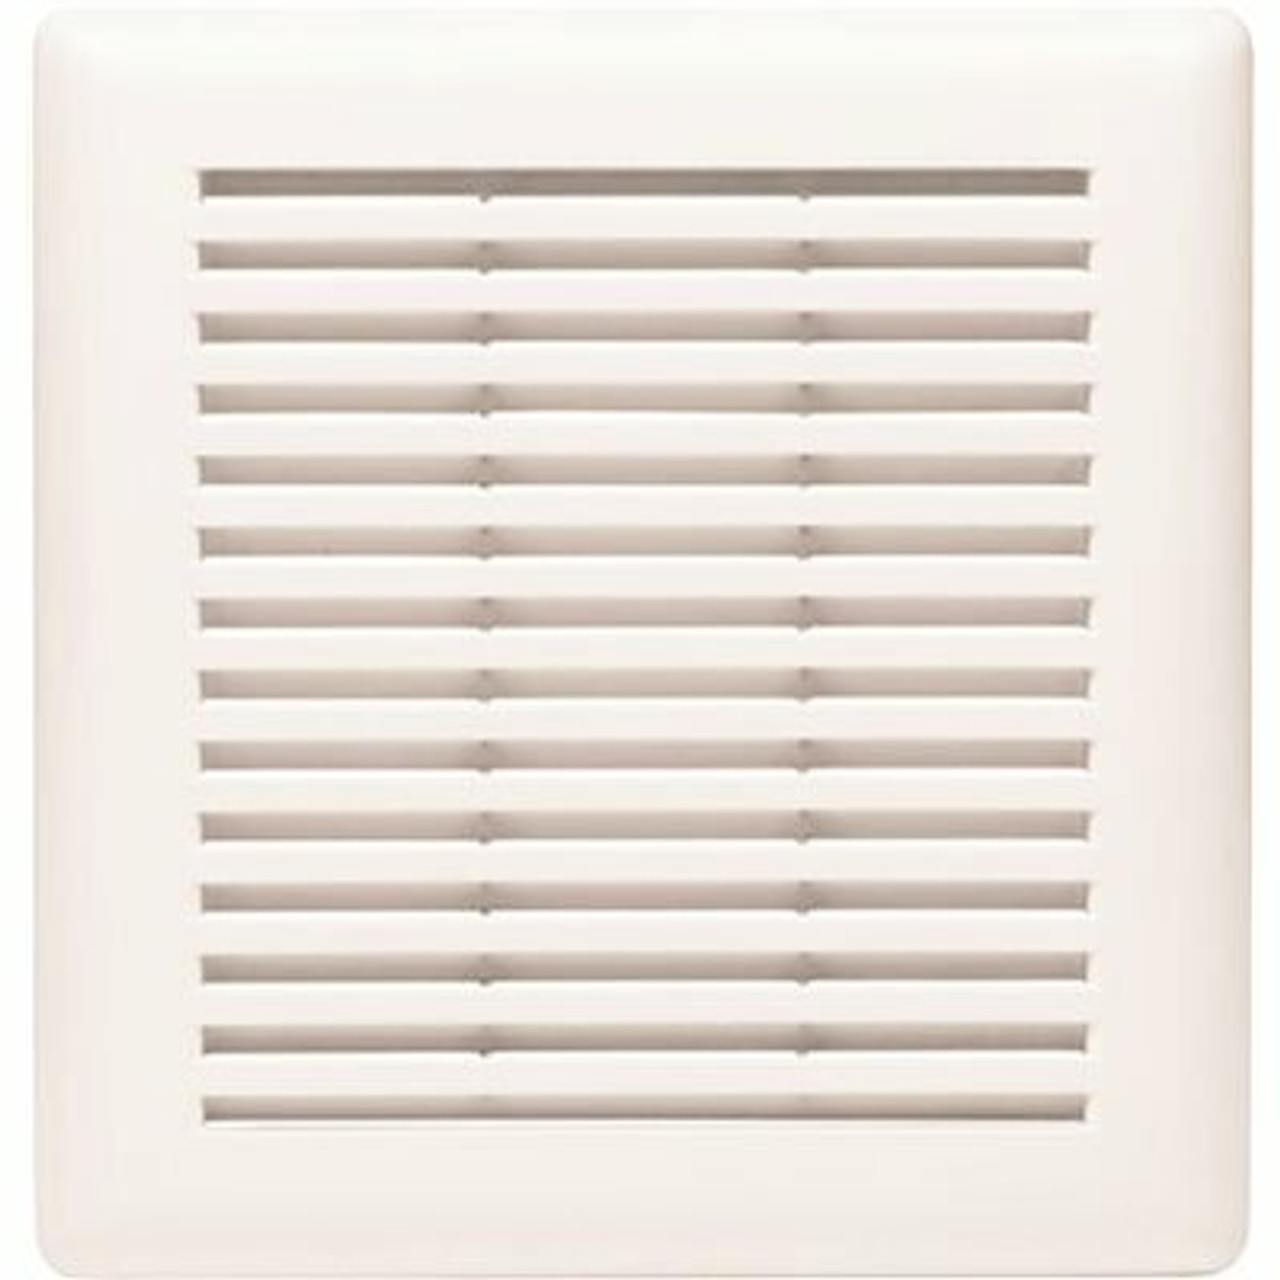 Broan-Nutone Replacement Grille In White, Includes Motor And Mounting Plate